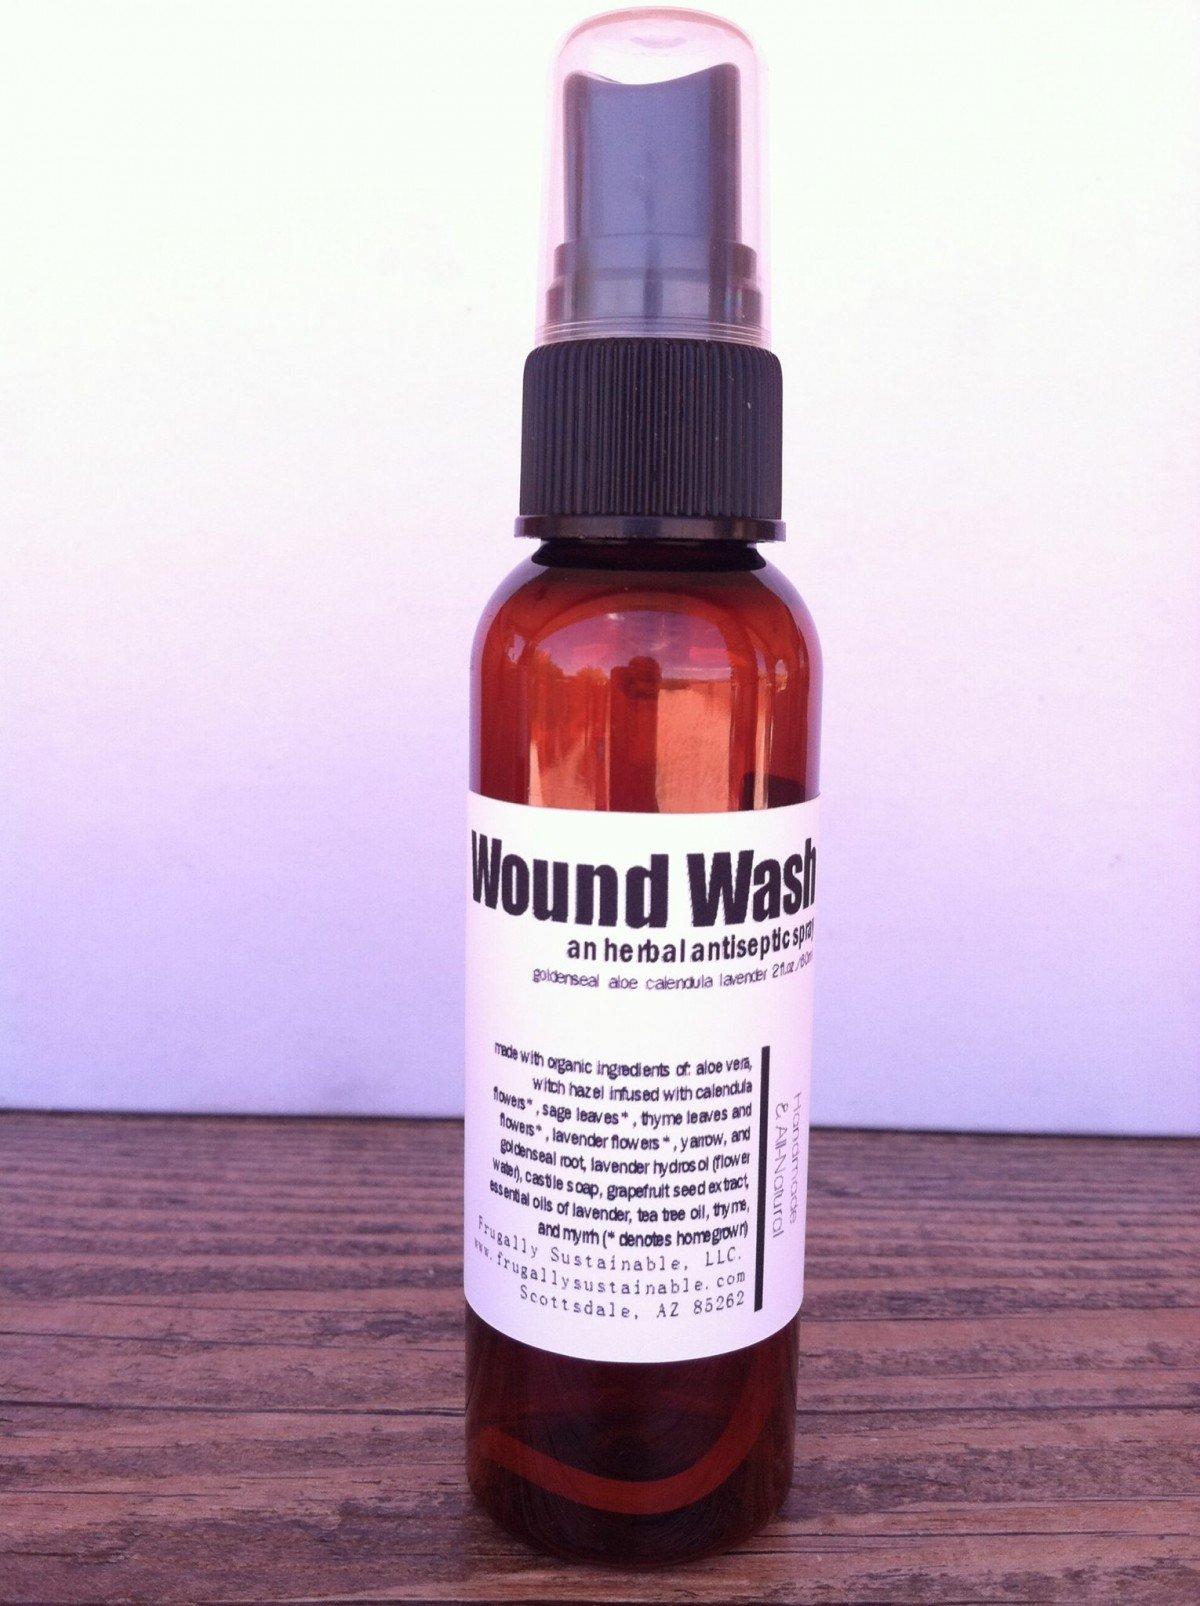 Frugally Sustainable's herbal wound wash recipe